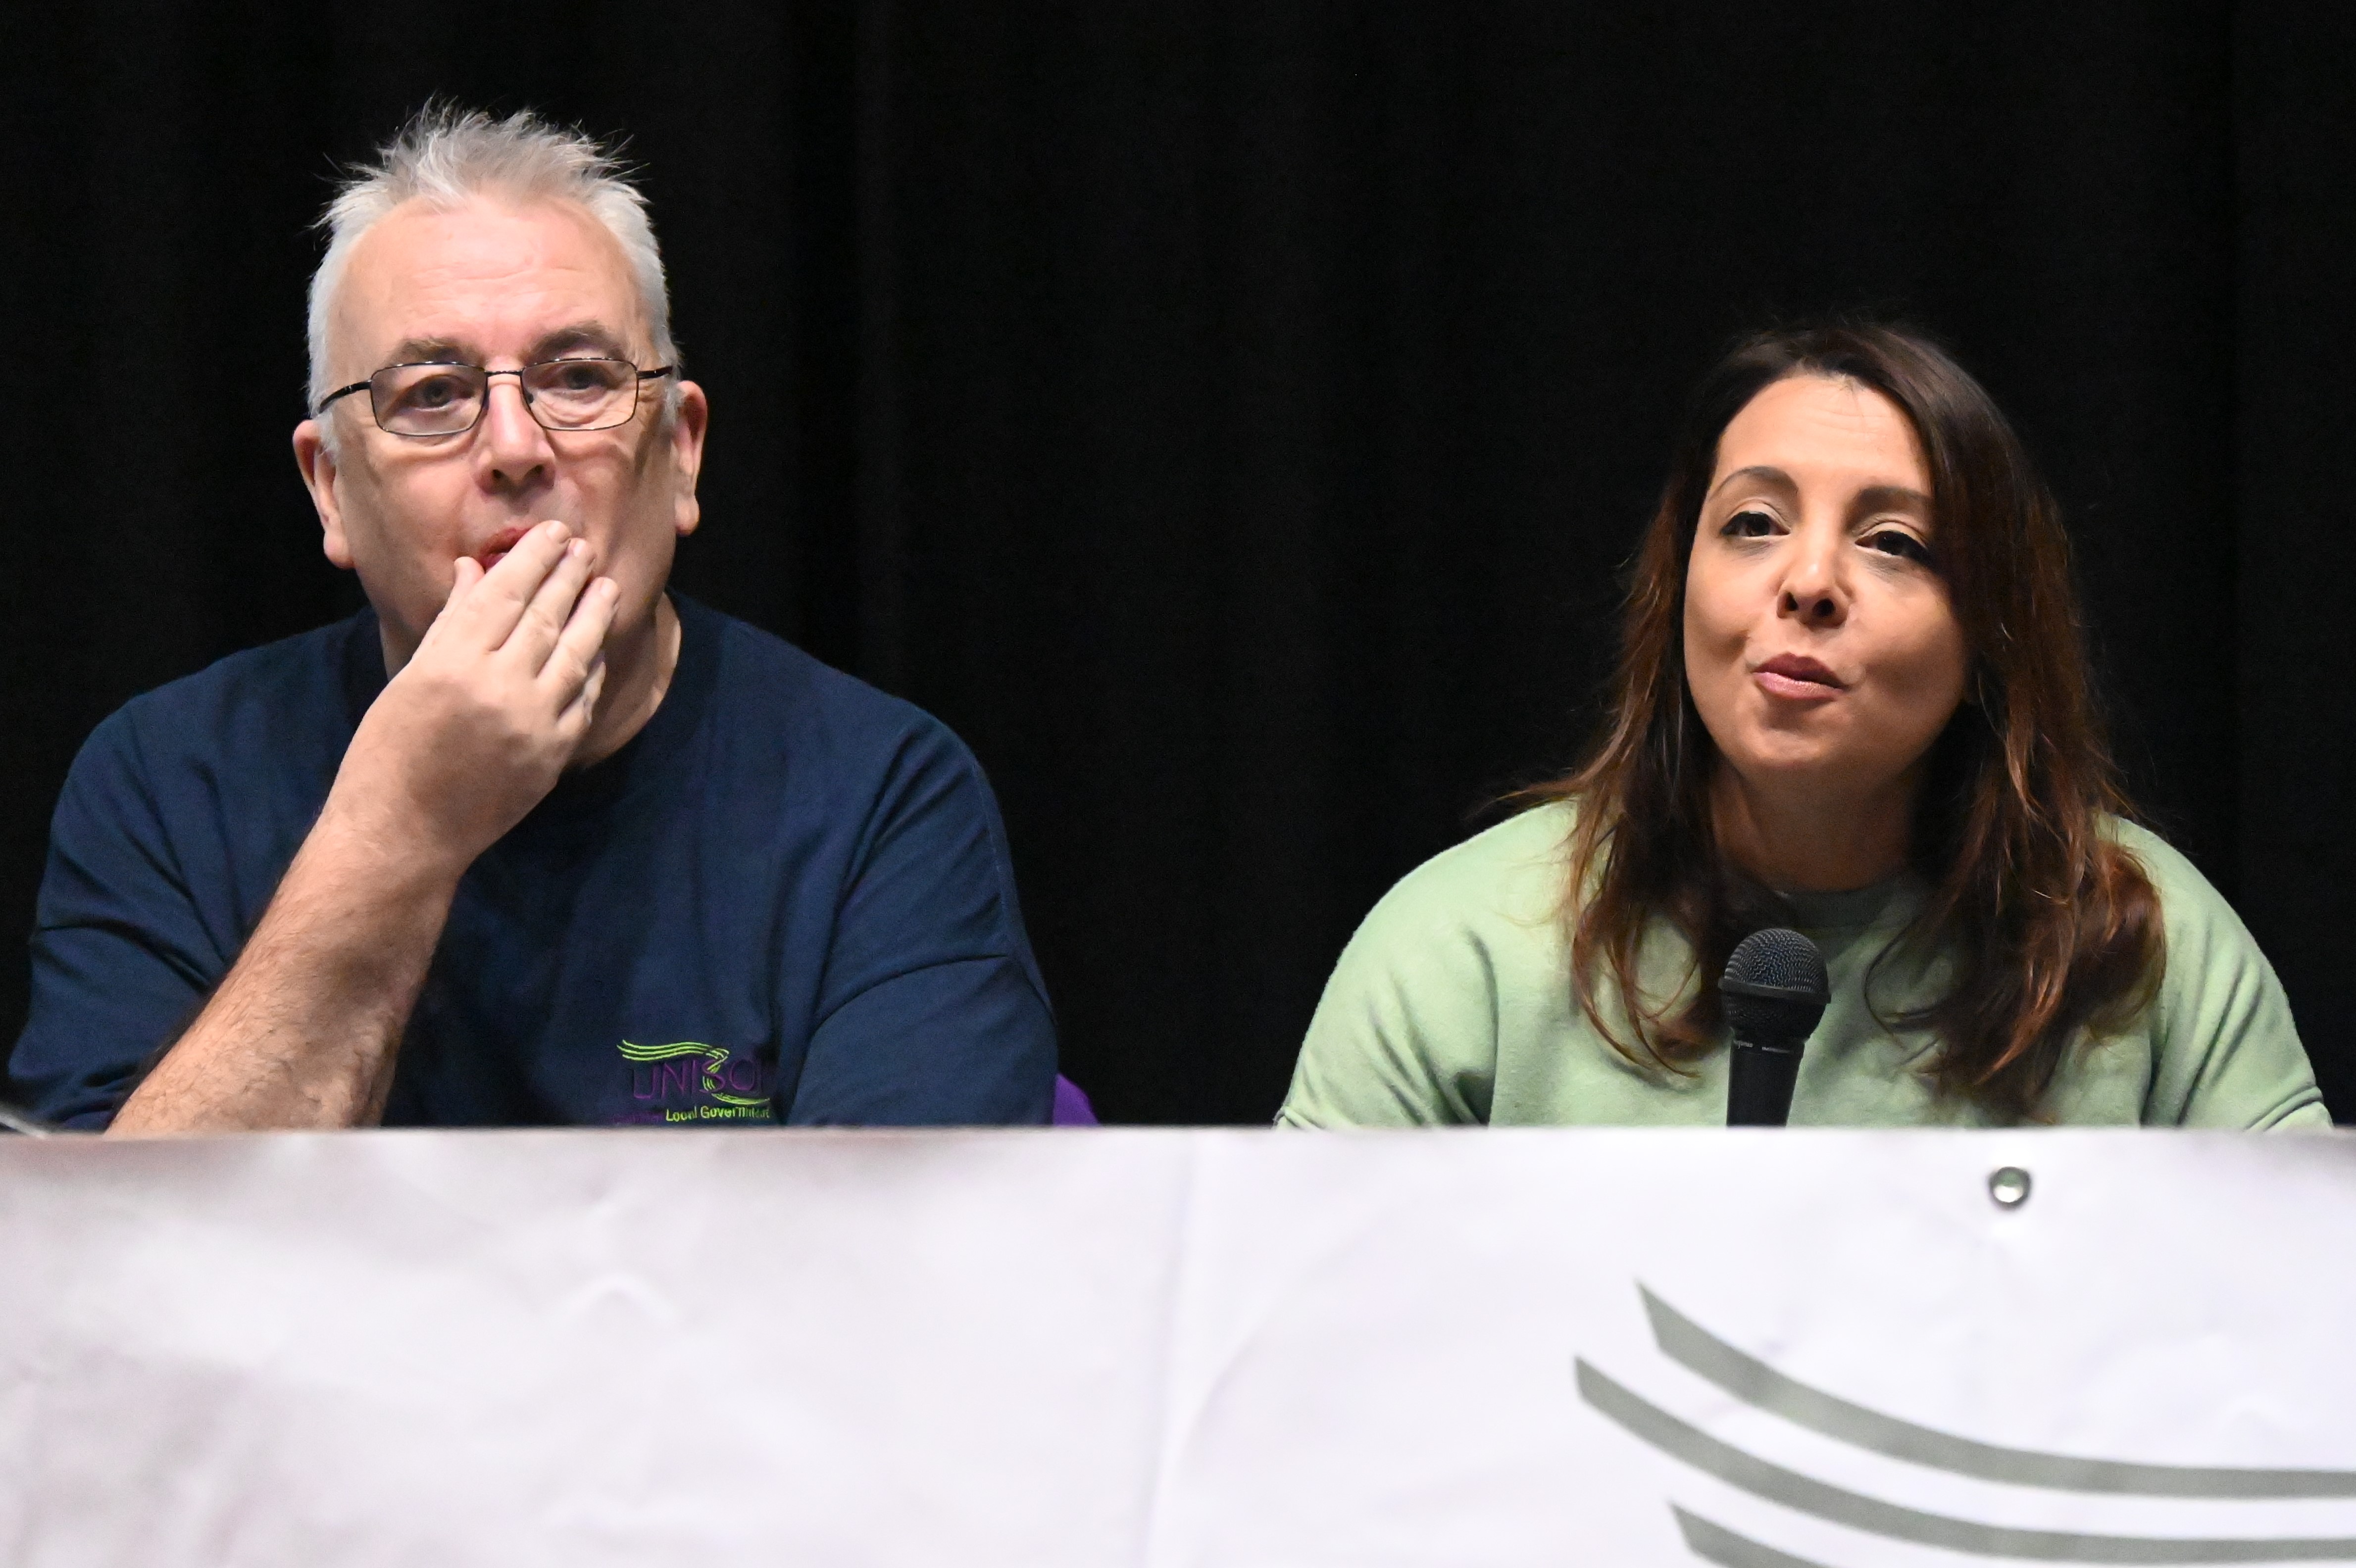 Shavanah Taj, General Secretary of the Wales TUC (right), gives peter Crews food for thought.